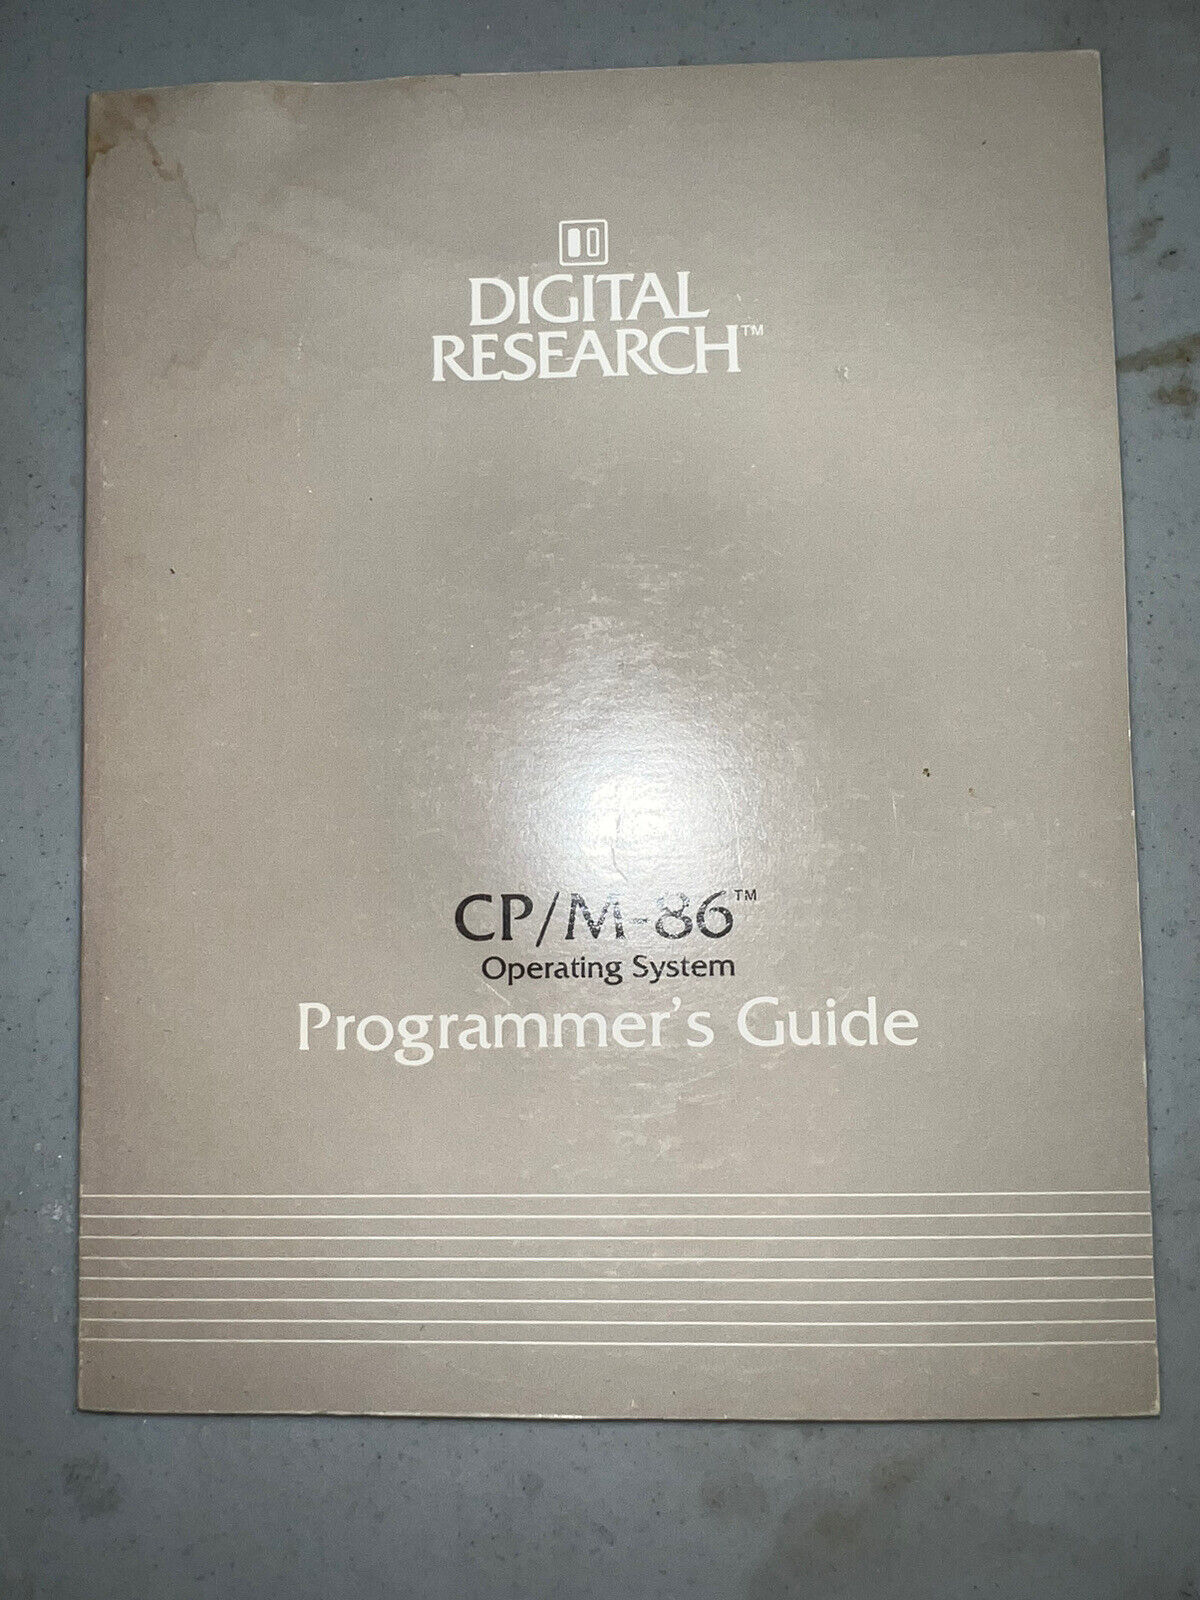 CP/M-86 operating system programmers guide- Digital Research 1981